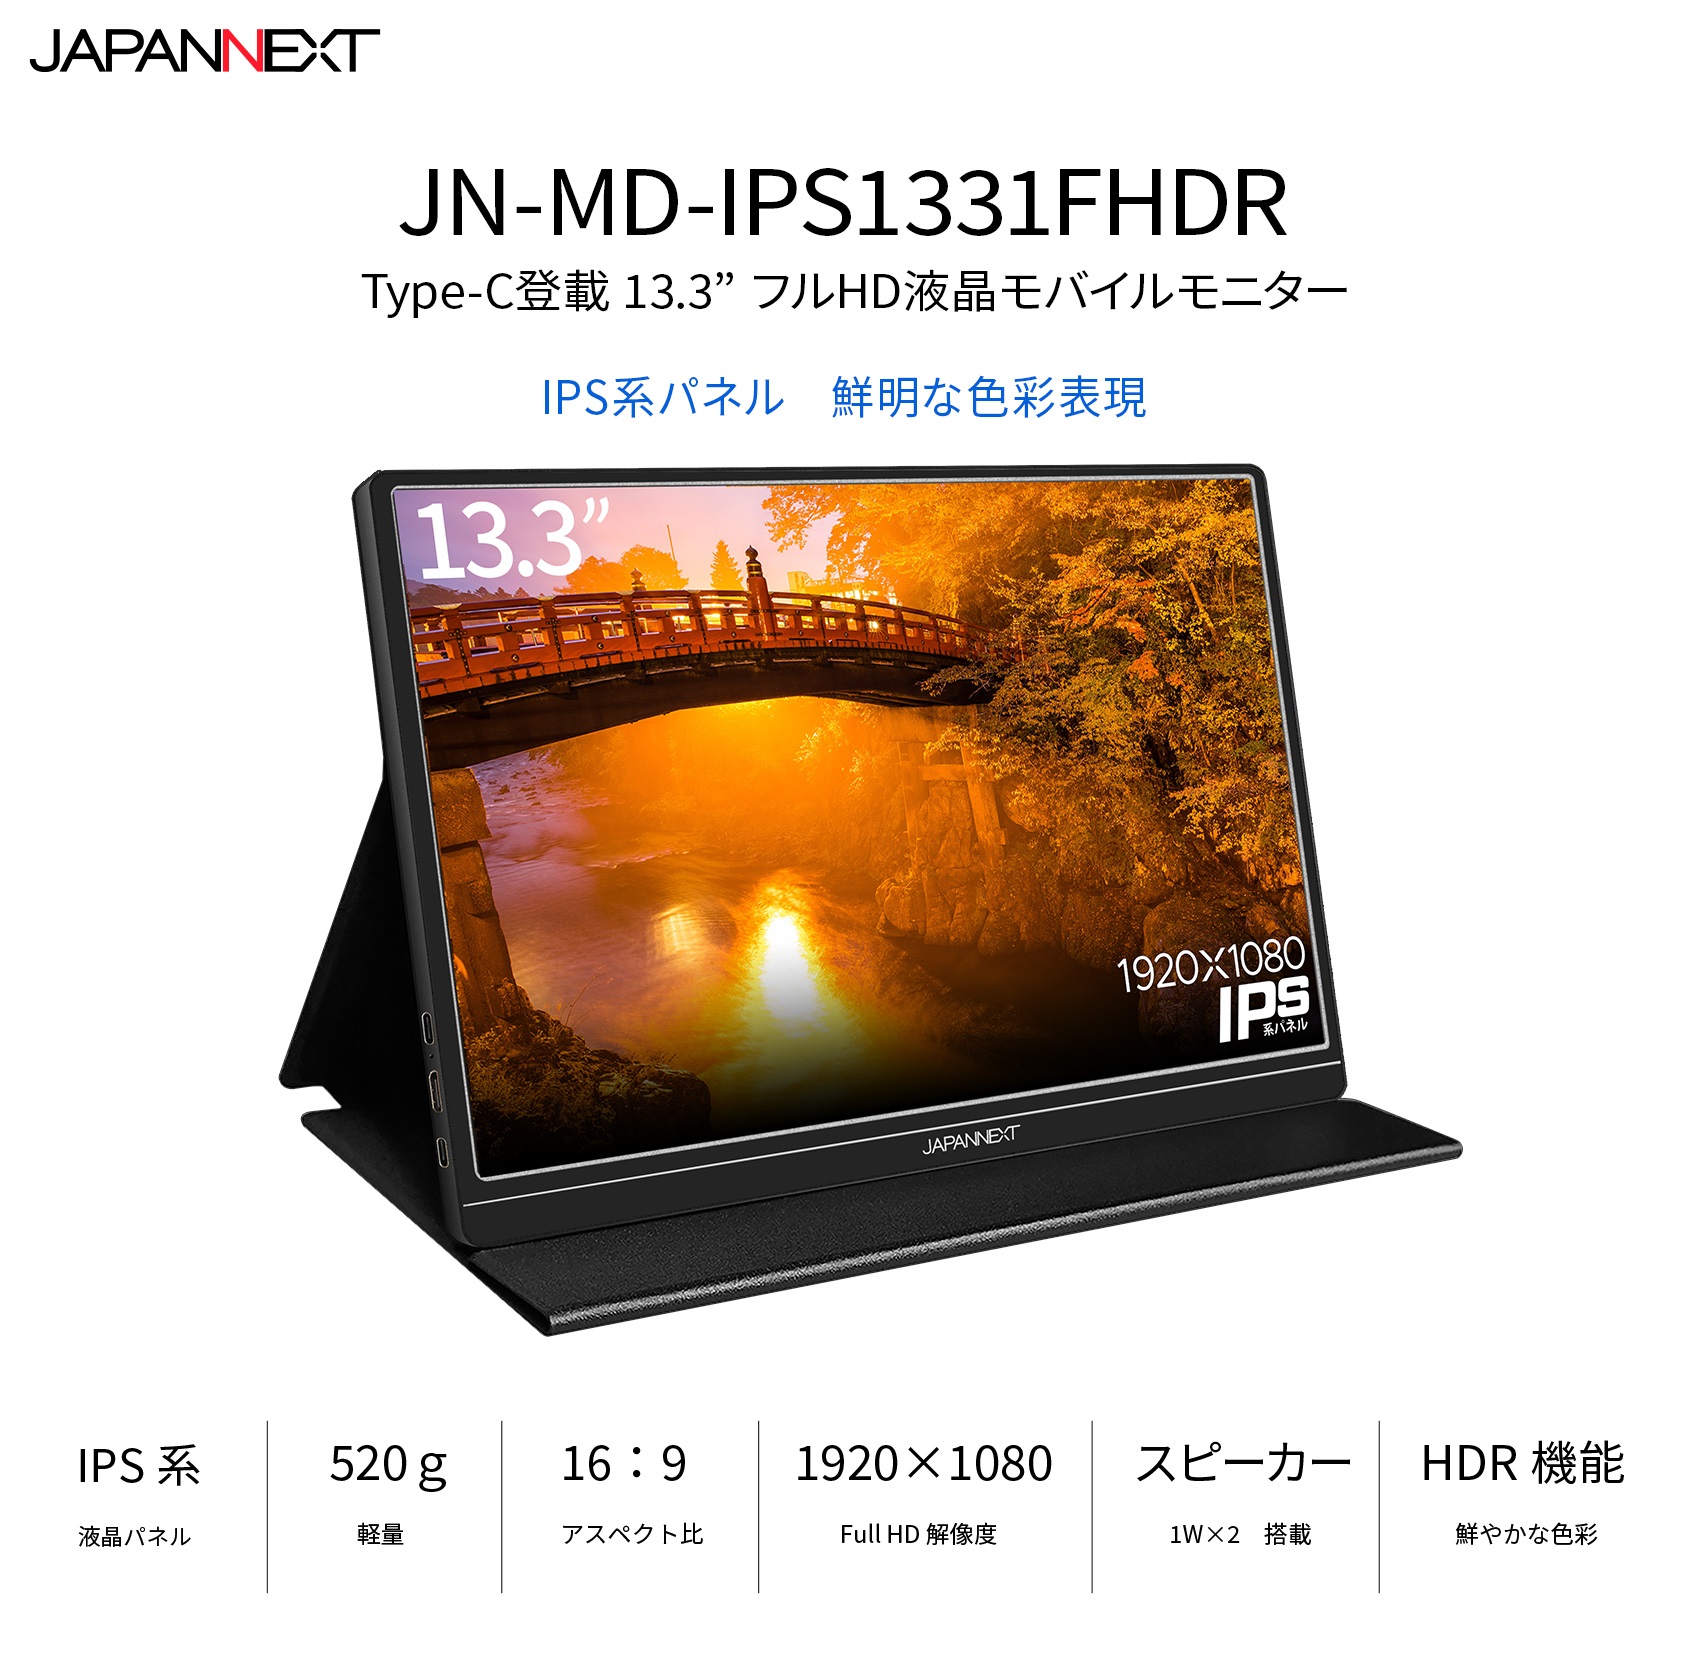 JAPANNEXT JN-MD-IPS1331FHDR 13.3インチ フル